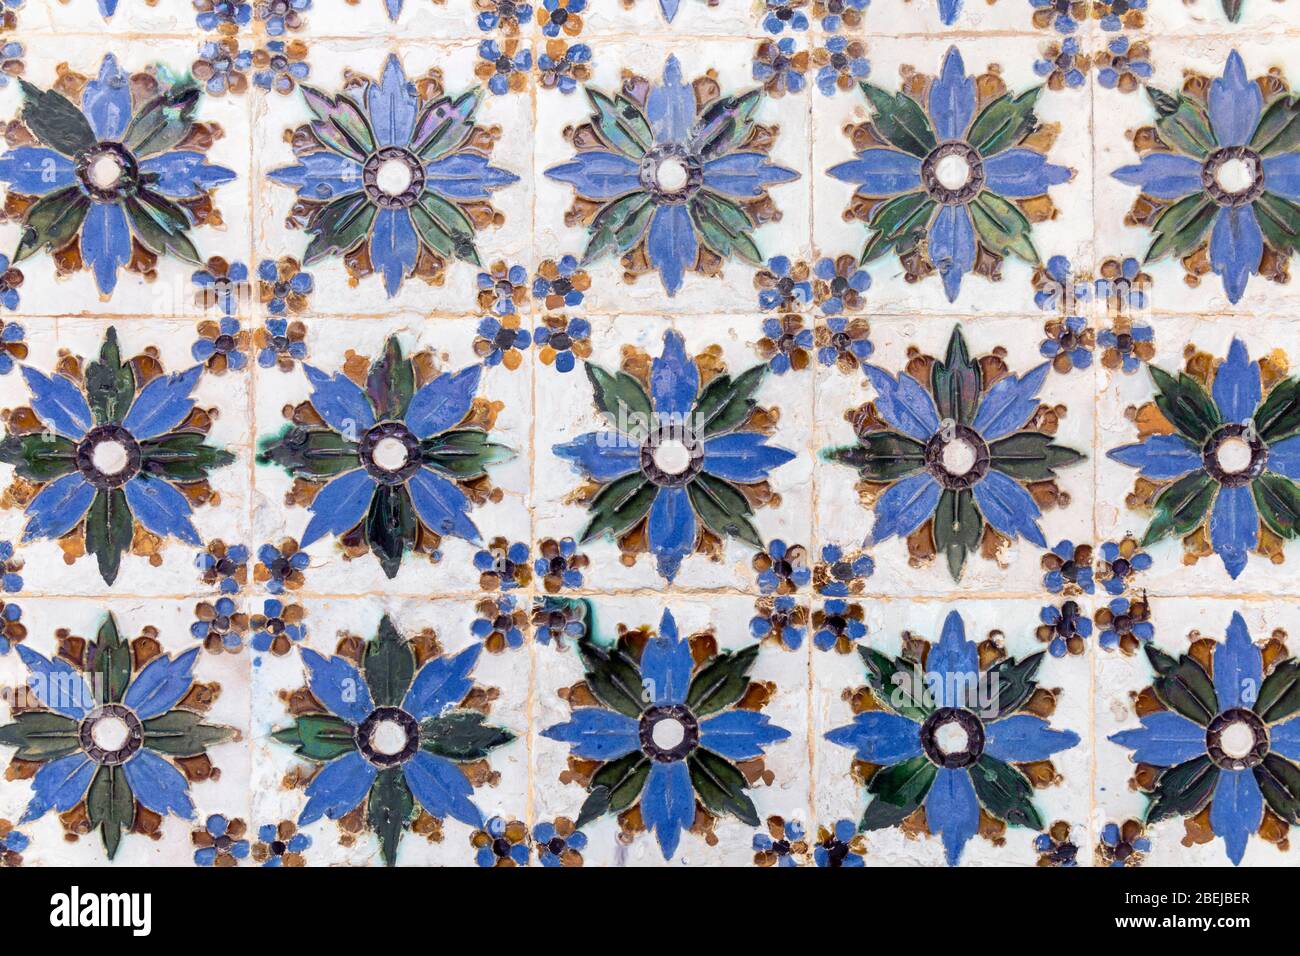 Ceramic tile work in the Casa de Pilatos, or Pilate’s House, Seville, Seville Province, Andalusia, southern Spain. Stock Photo